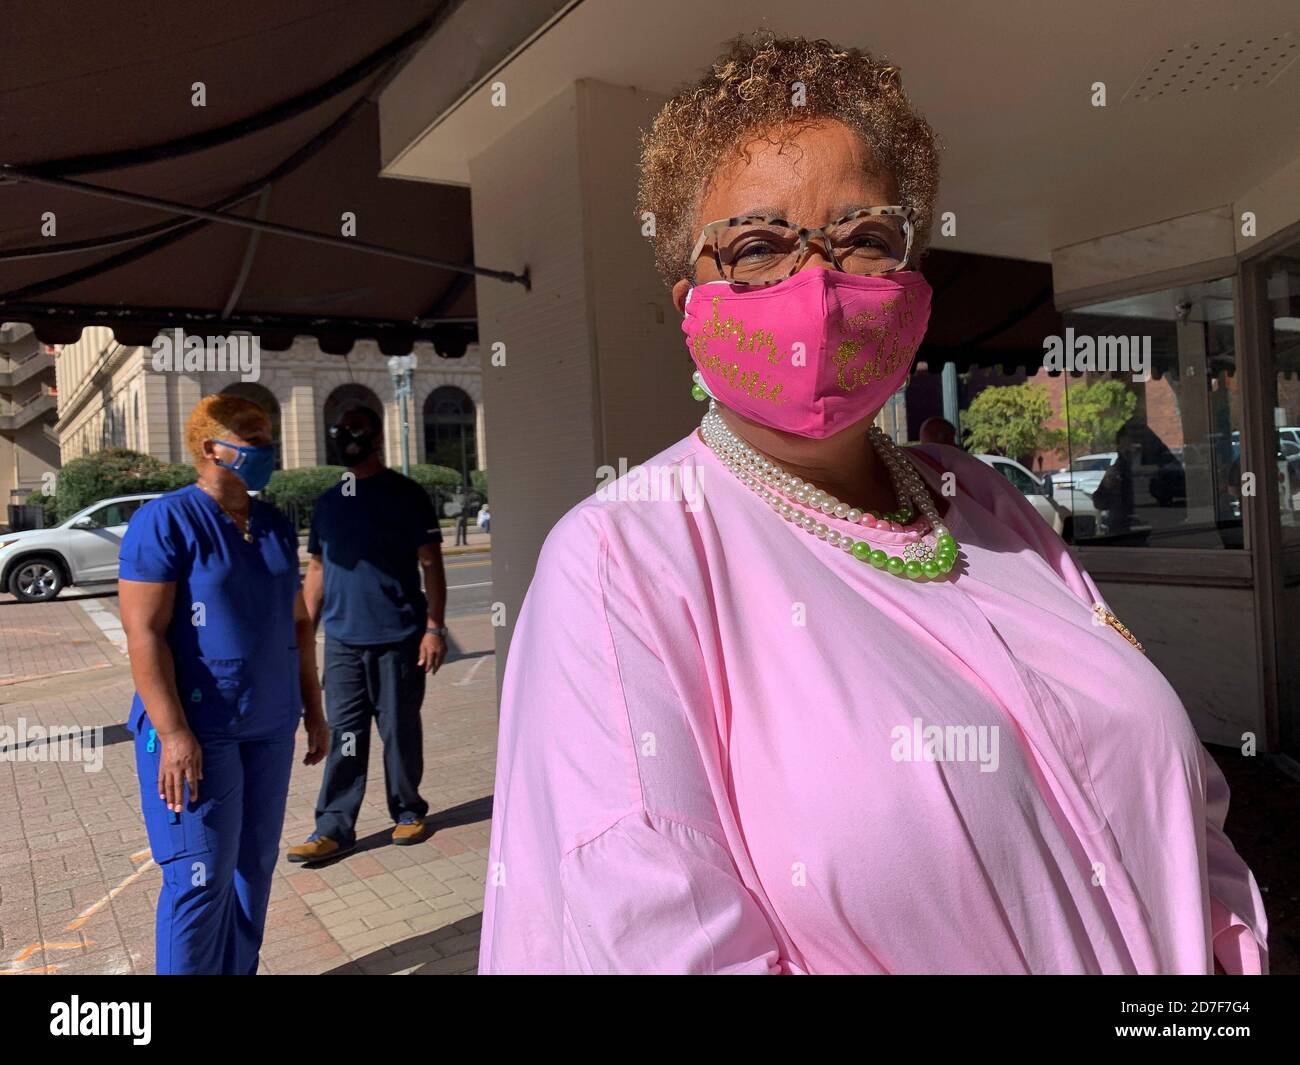 Shreveport, Louisiana, USA. 21st Oct, 2020. Waiting in line to vote, Burnadine Anderson proudly wears the pearls and colors of Alpha Kappa Alpha (AKA), the first historically African American Greek-lettered sorority, in support of her sister sorority member Kamala Harris. Credit: Sue Dorfman/ZUMA Wire/Alamy Live News Stock Photo